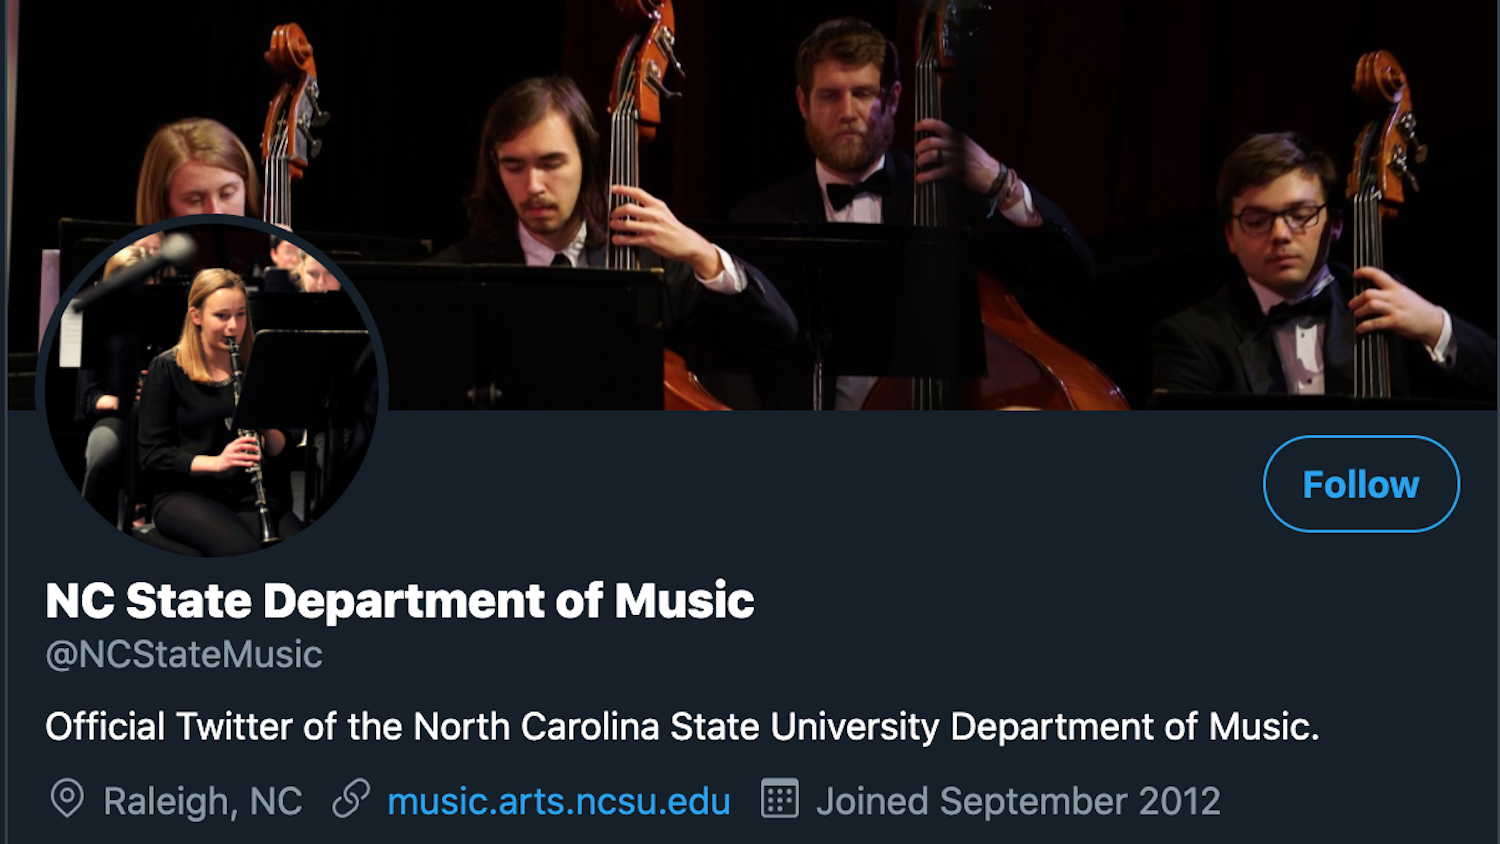 The Department of Music’s Twitter page